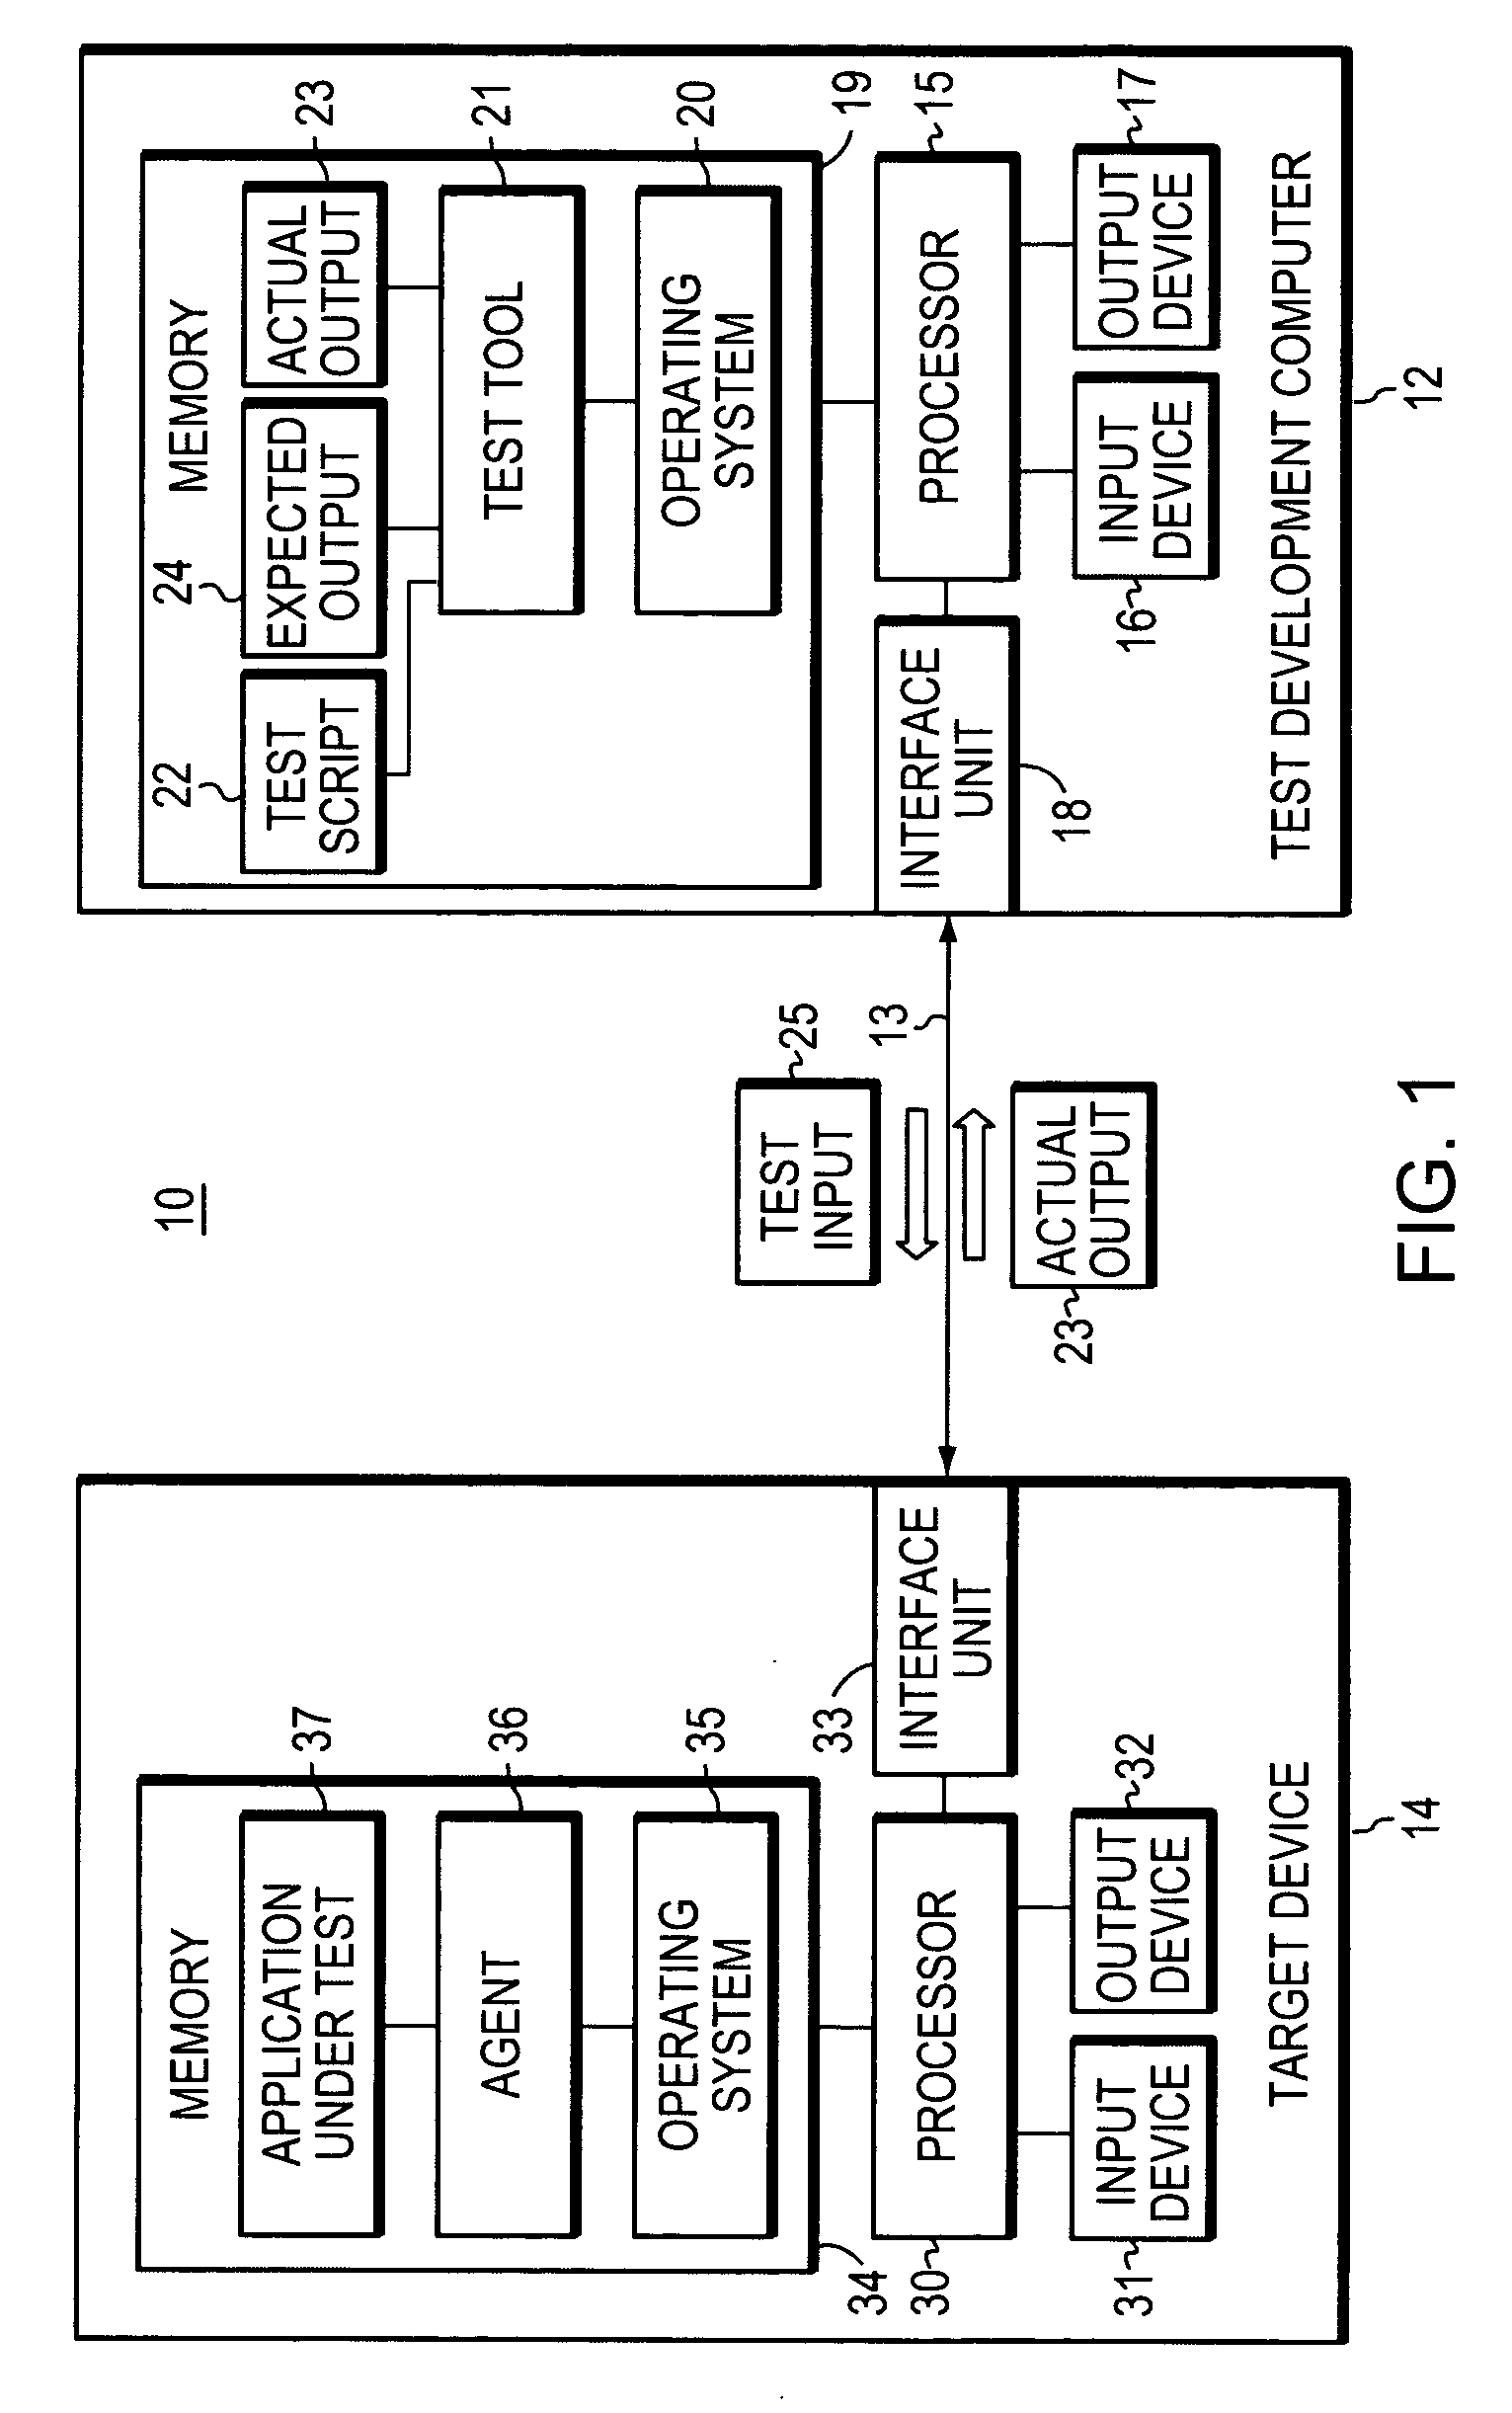 Automated test system for testing an application running in a windows-based environment and related methods